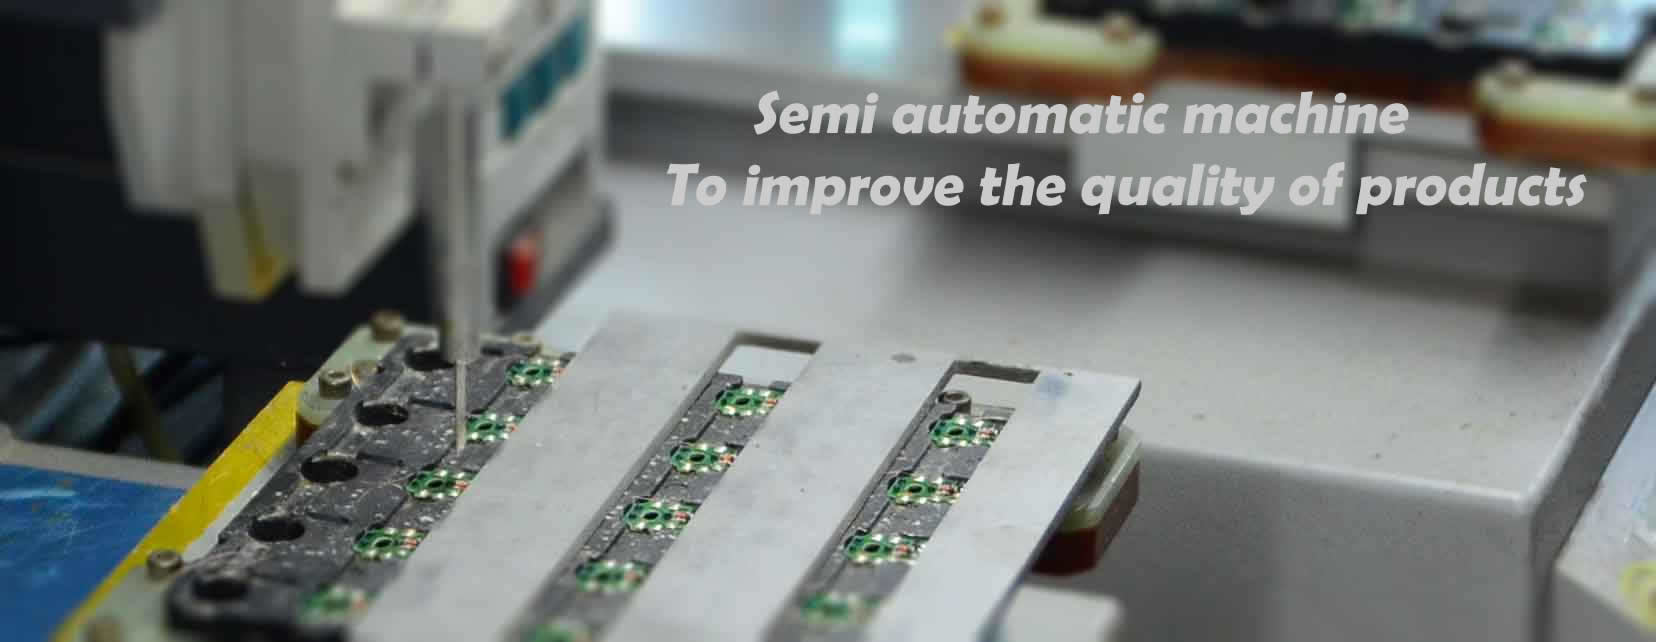  Semi automatic machine to  improve the quality of products